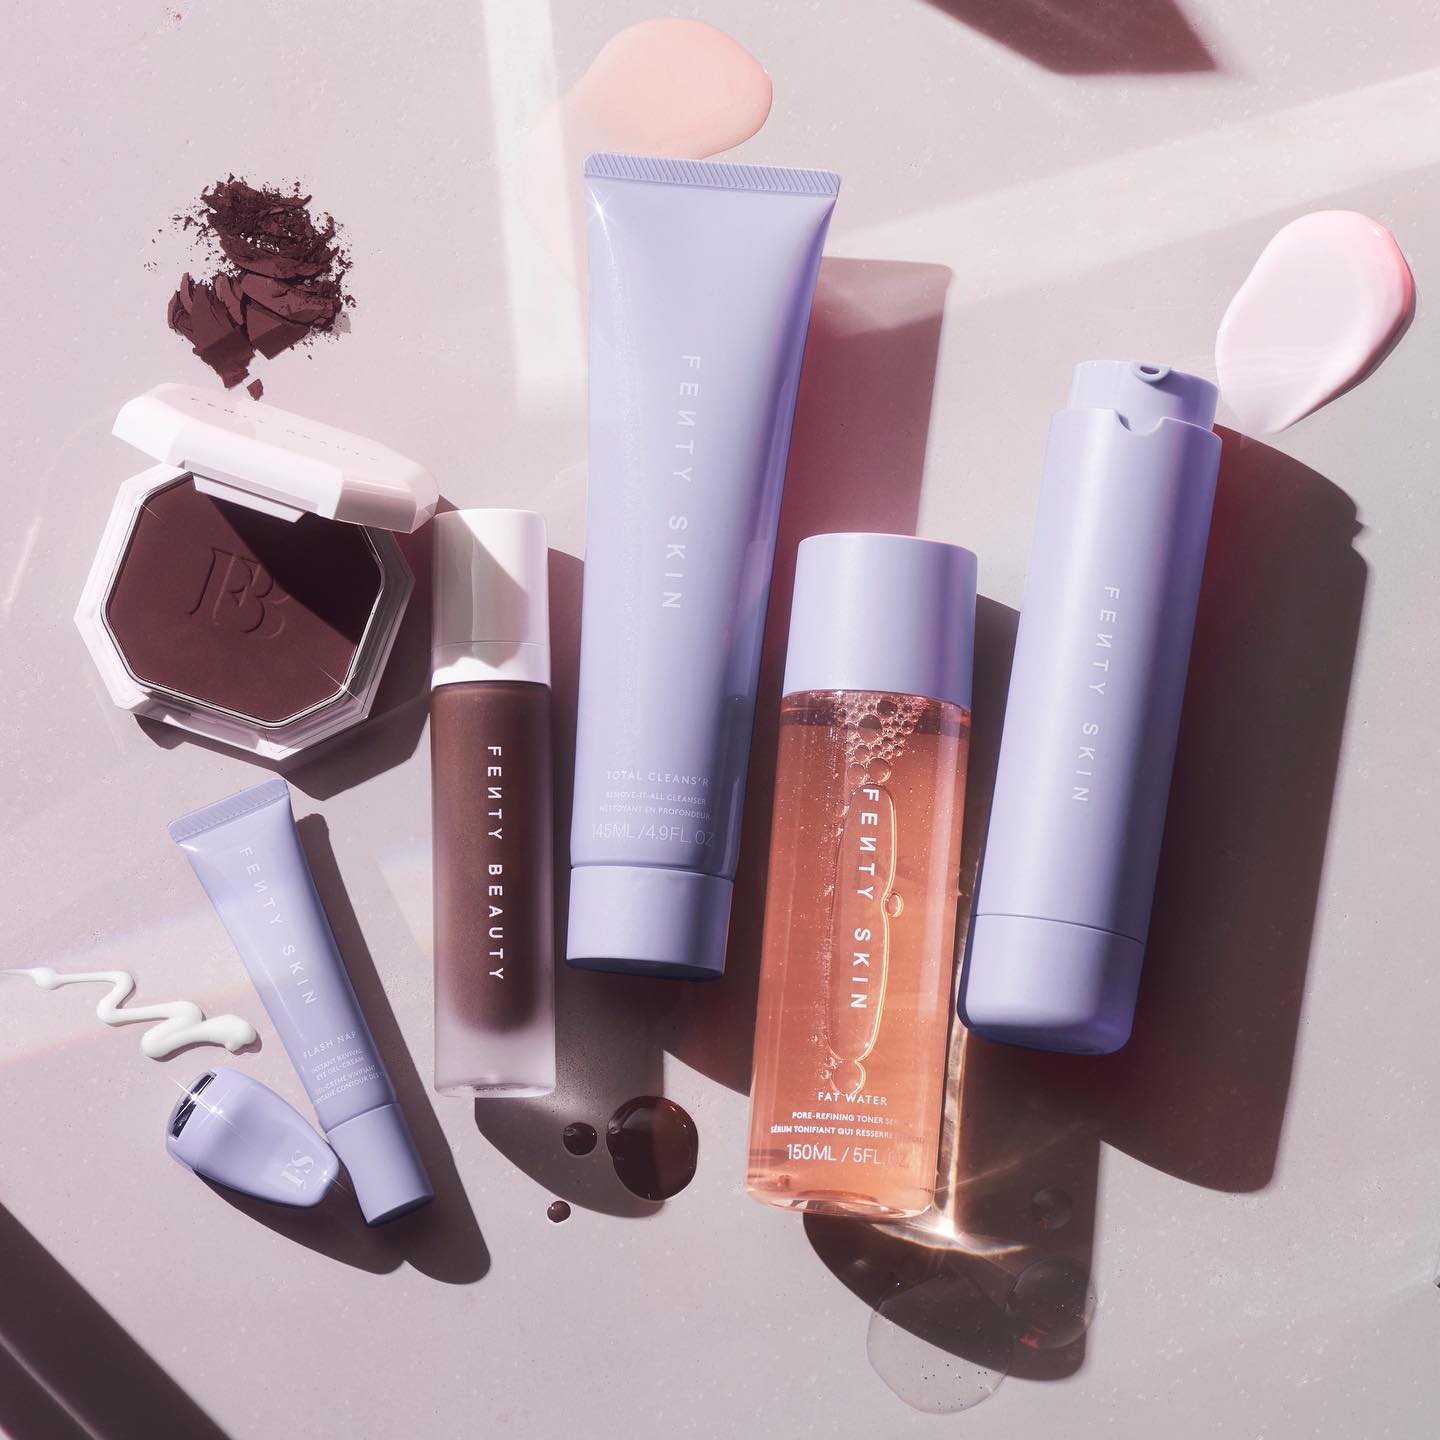 Various Fenty Beauty and Fenty Skin products are laid out on a light background.